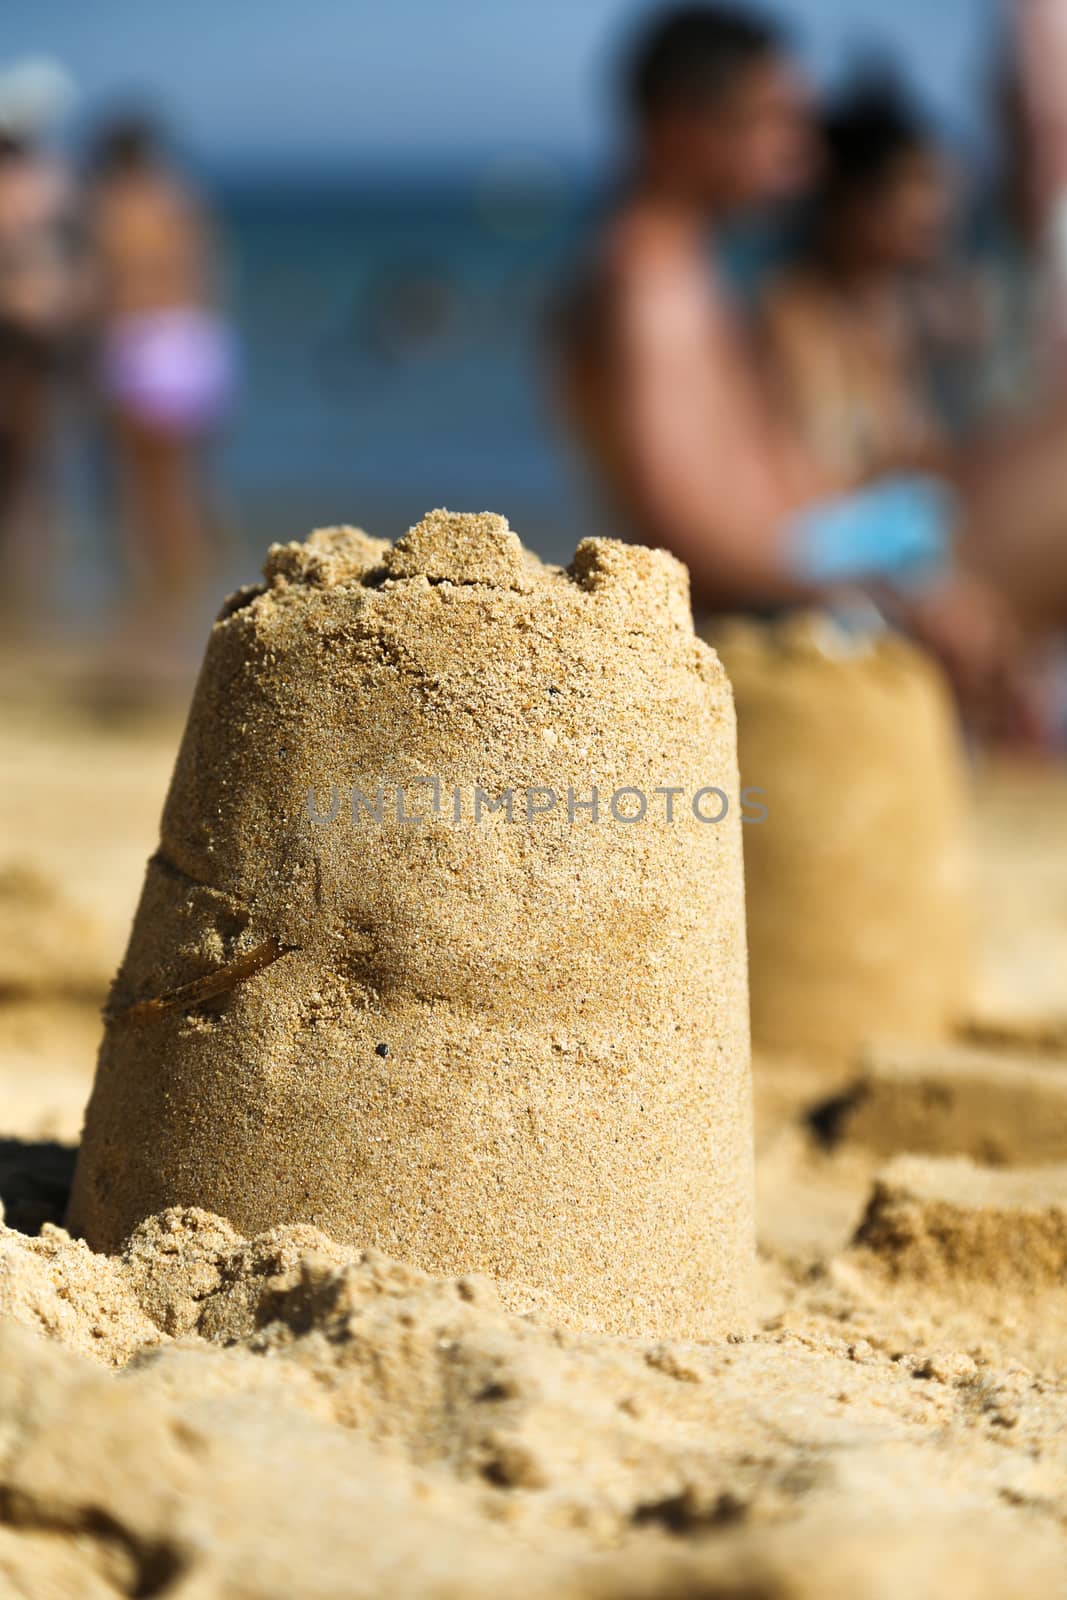 Sand Tower on the beach with blurred people in the background